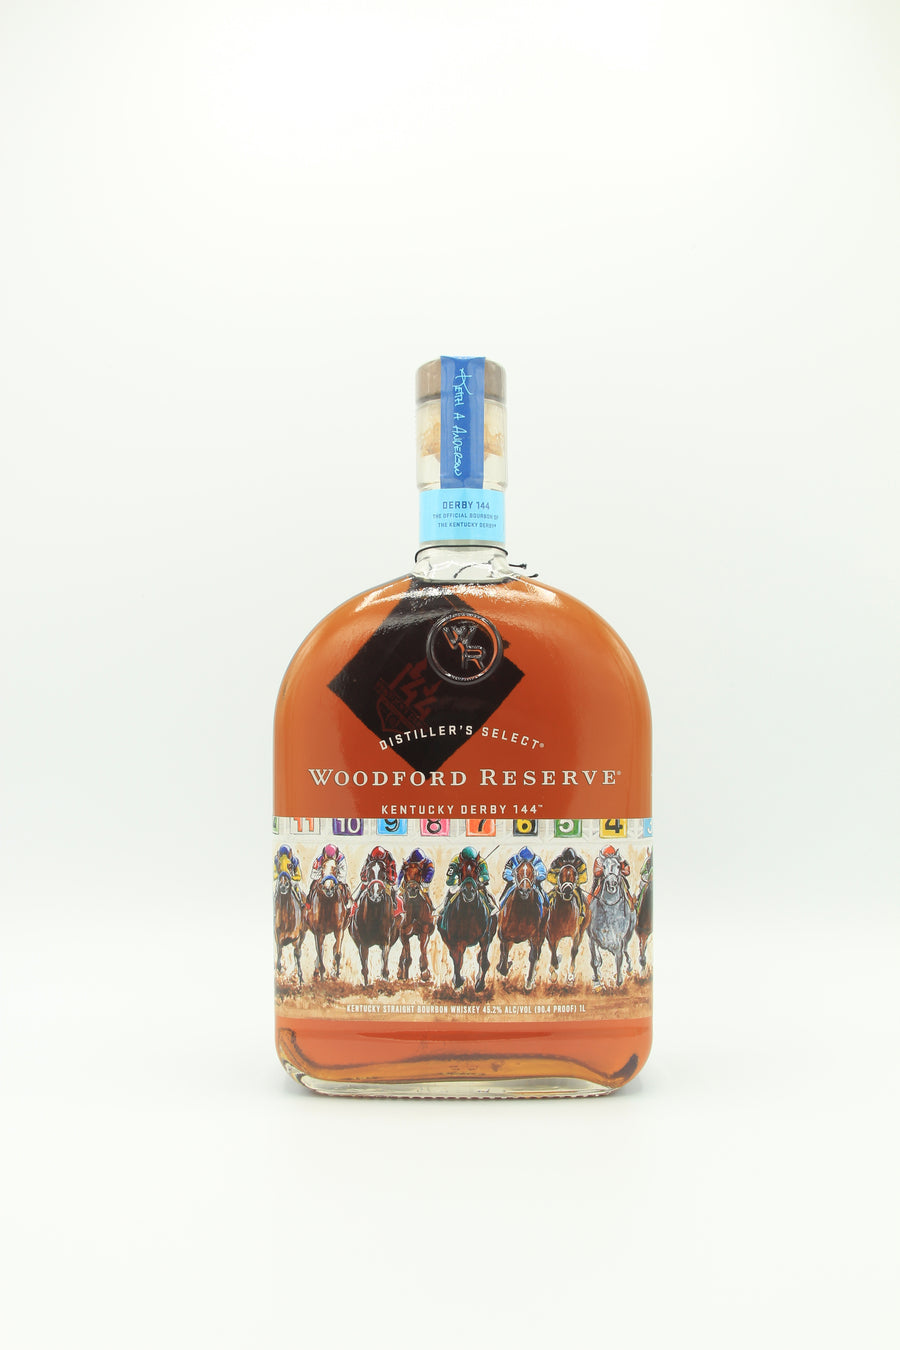 Woodford Reserve Kentucky Derby 144, USA